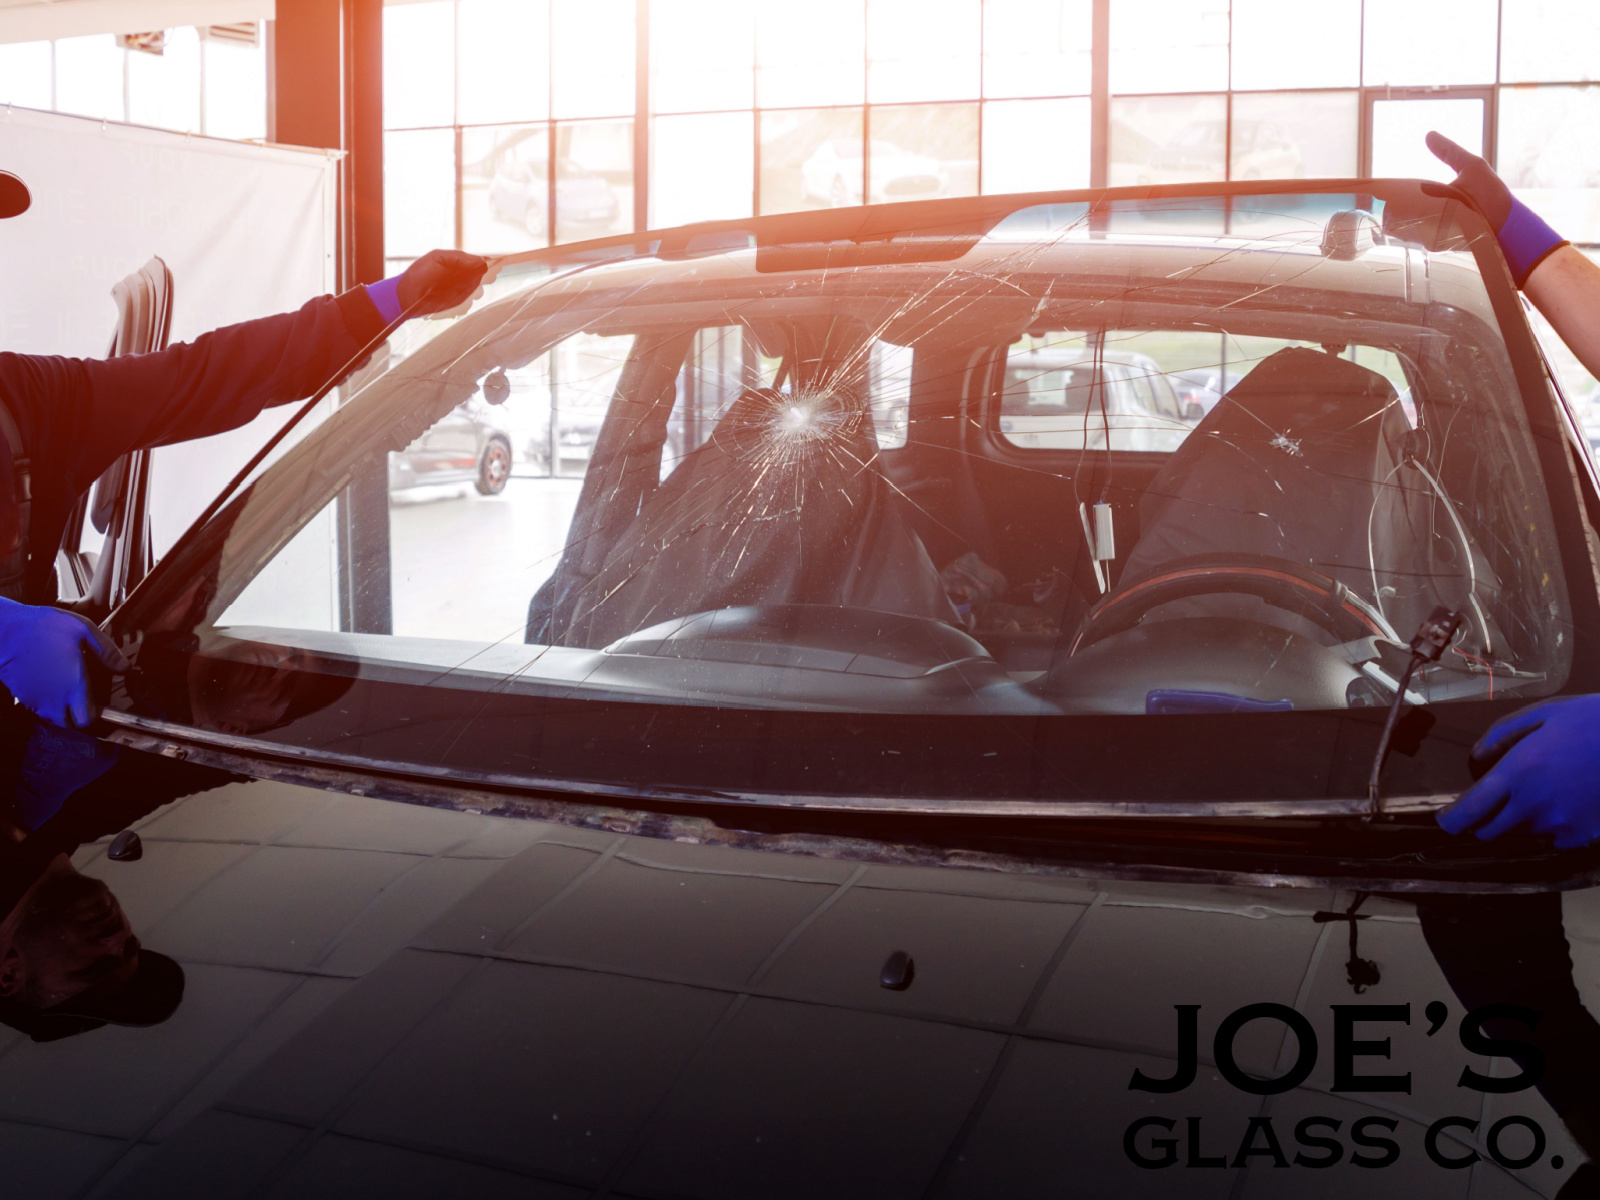 Mastering Large One-Piece Windshield Excellence at Joe's Glass Co.